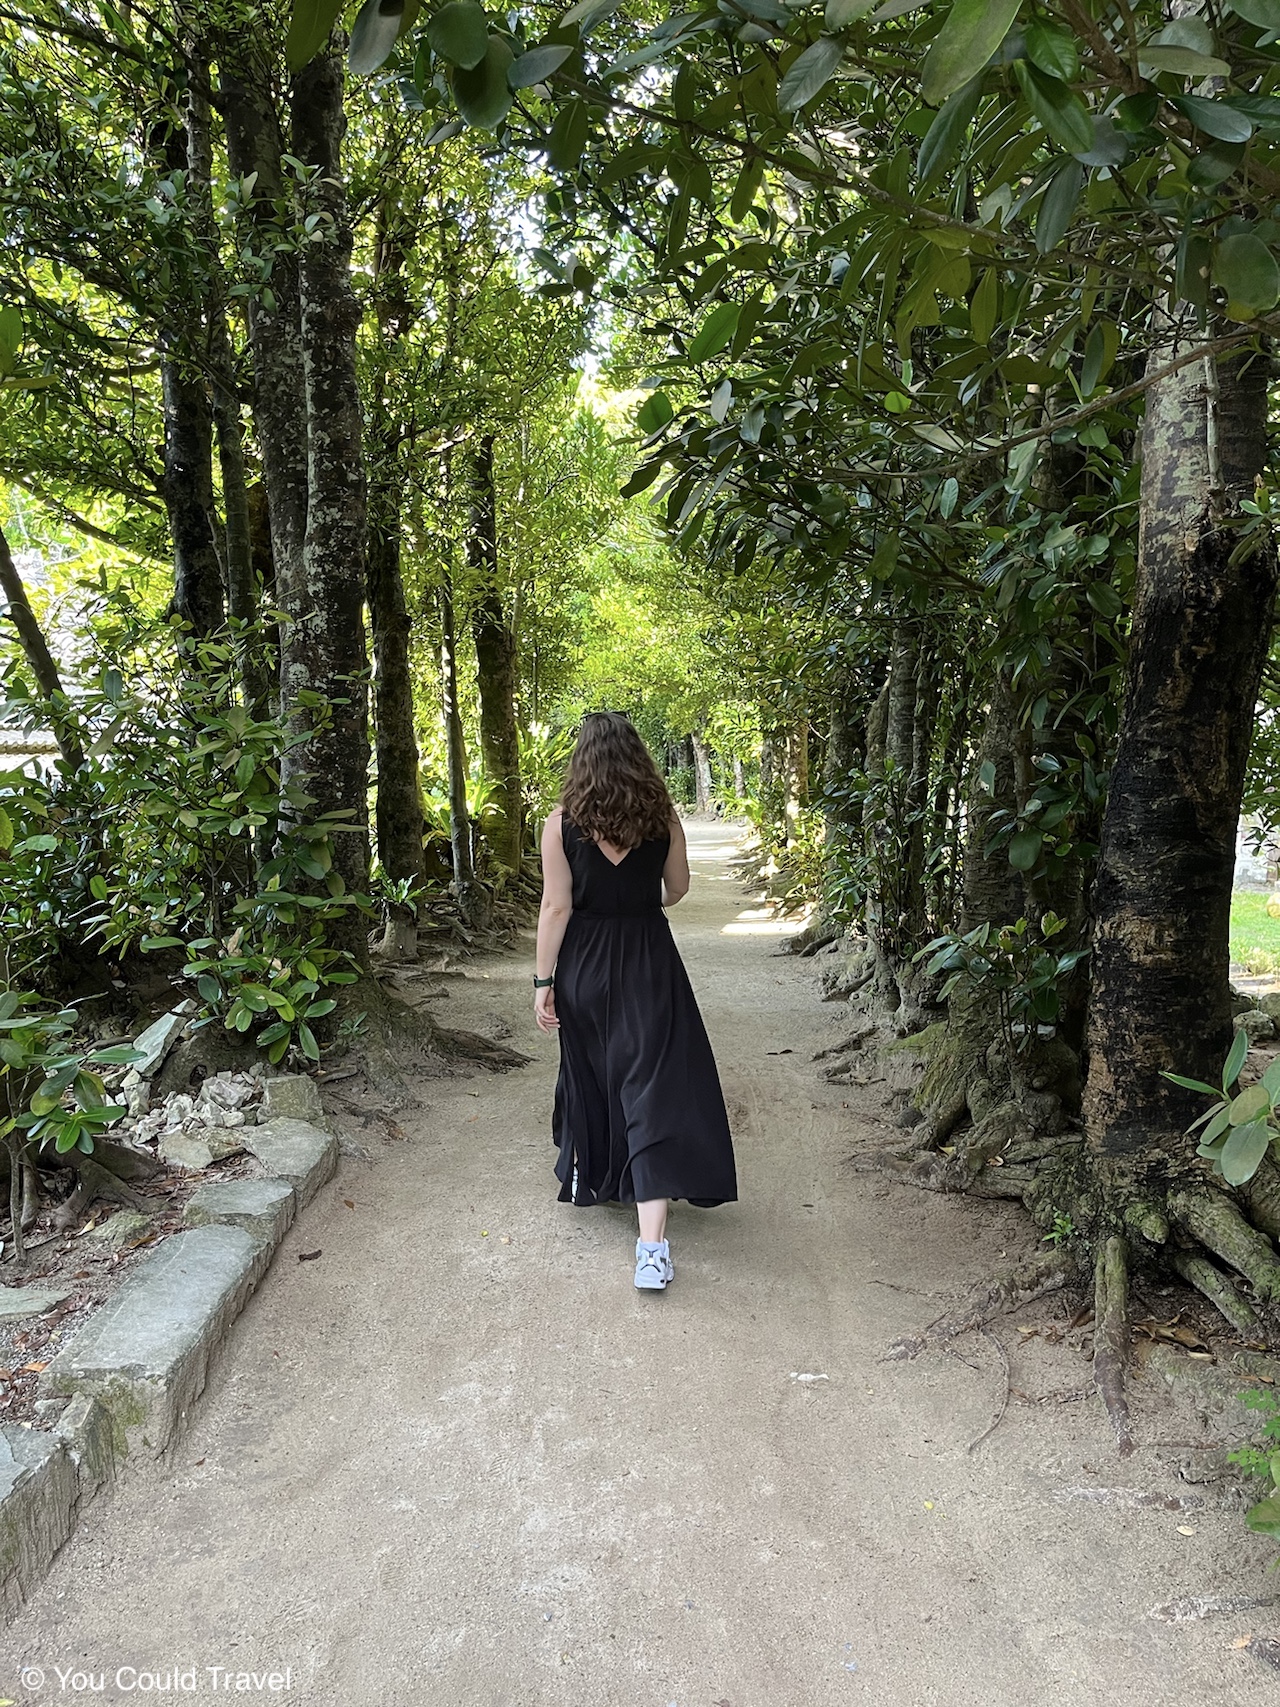 Cory from You Could Travel exploring the Bise Fukugi Tree Road in Okinawa